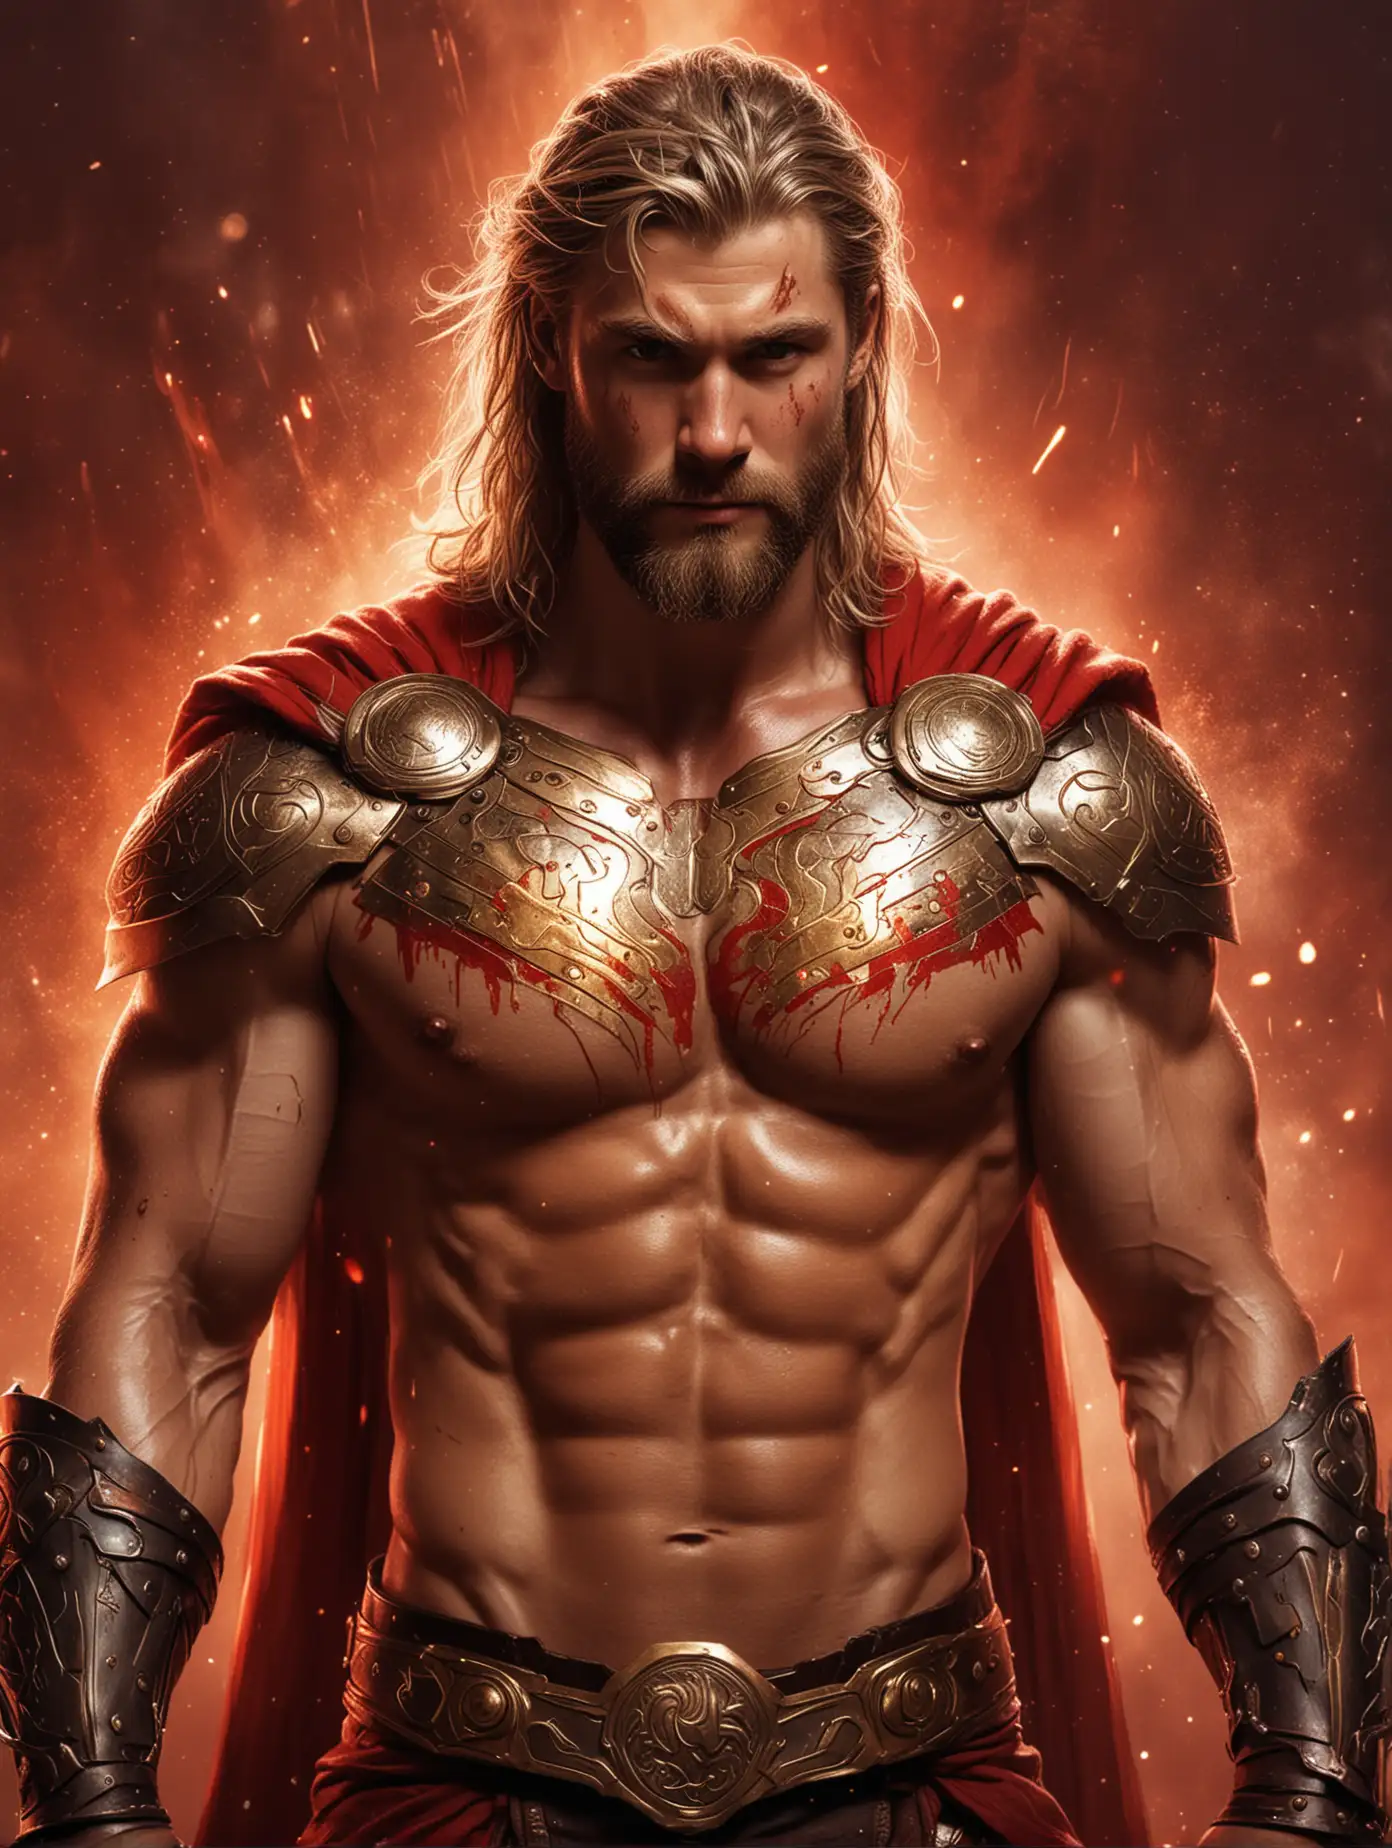 Illustration of a handsome shirtless demi-god man like thor, beard, nice abs, armor, weapons, red fog, gold sparks